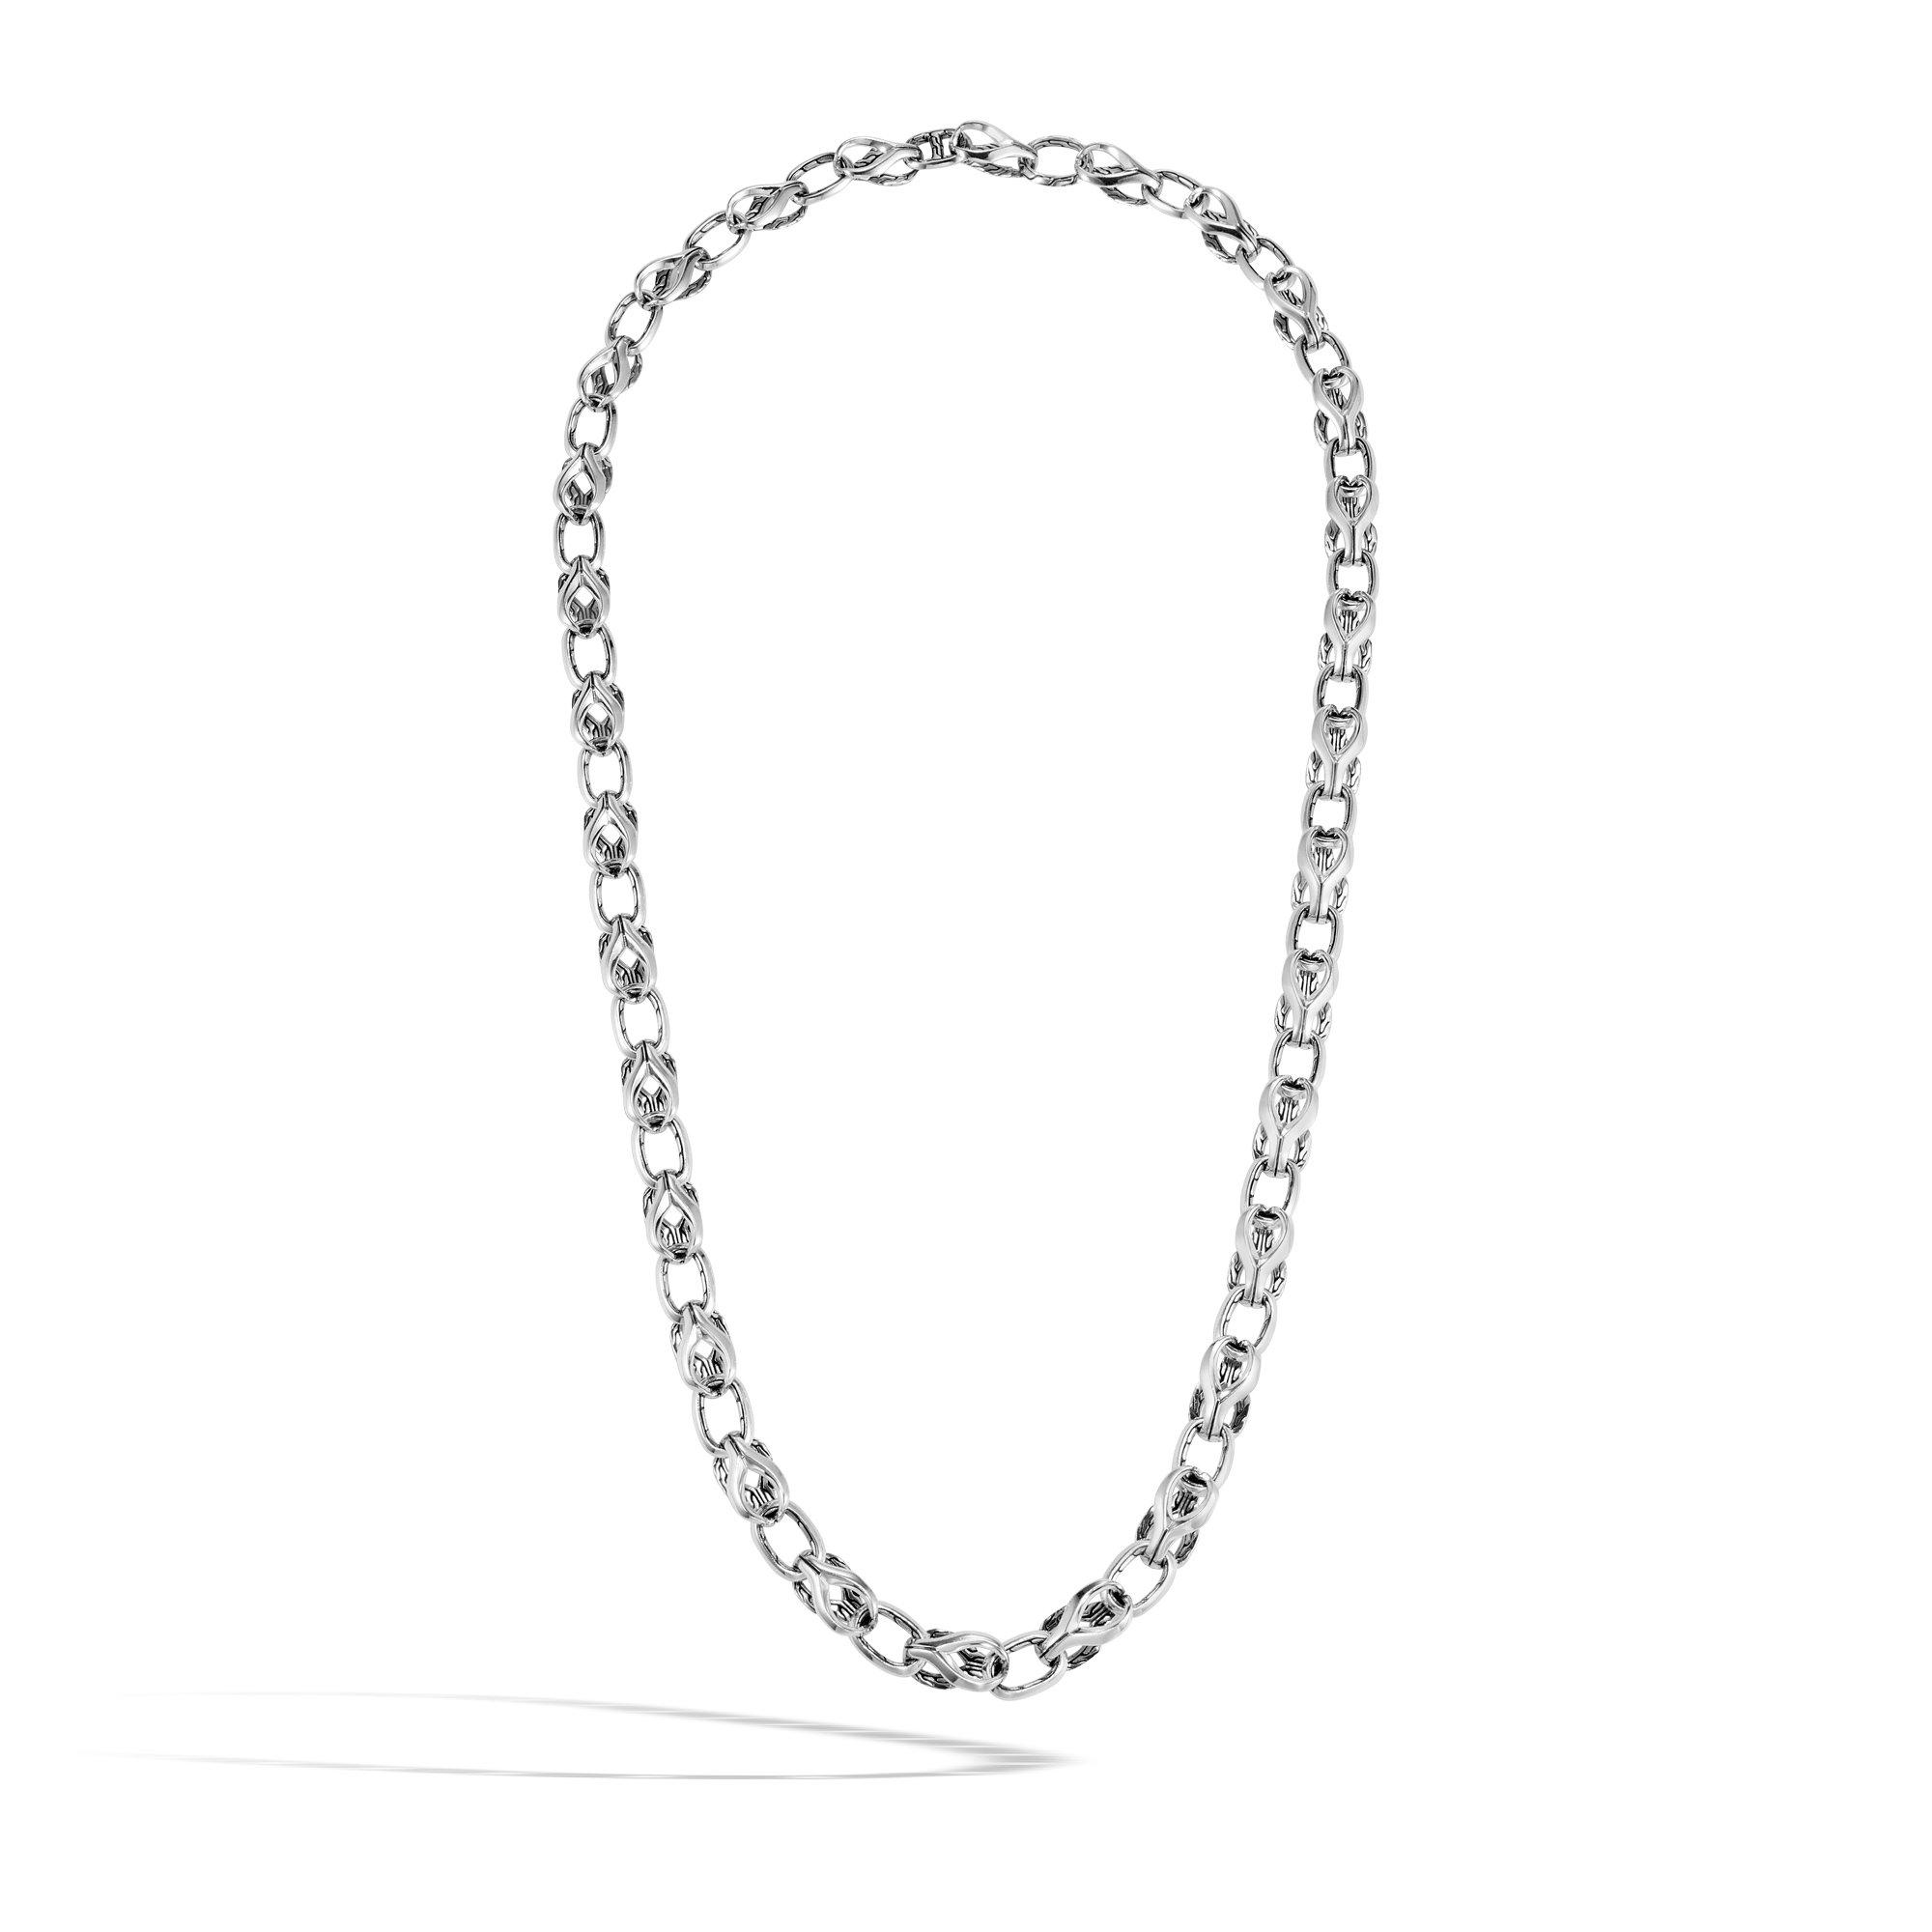 John Hardy: Sterling Silver  Asli Classic Chain 9mm Silver Link
Length: 26